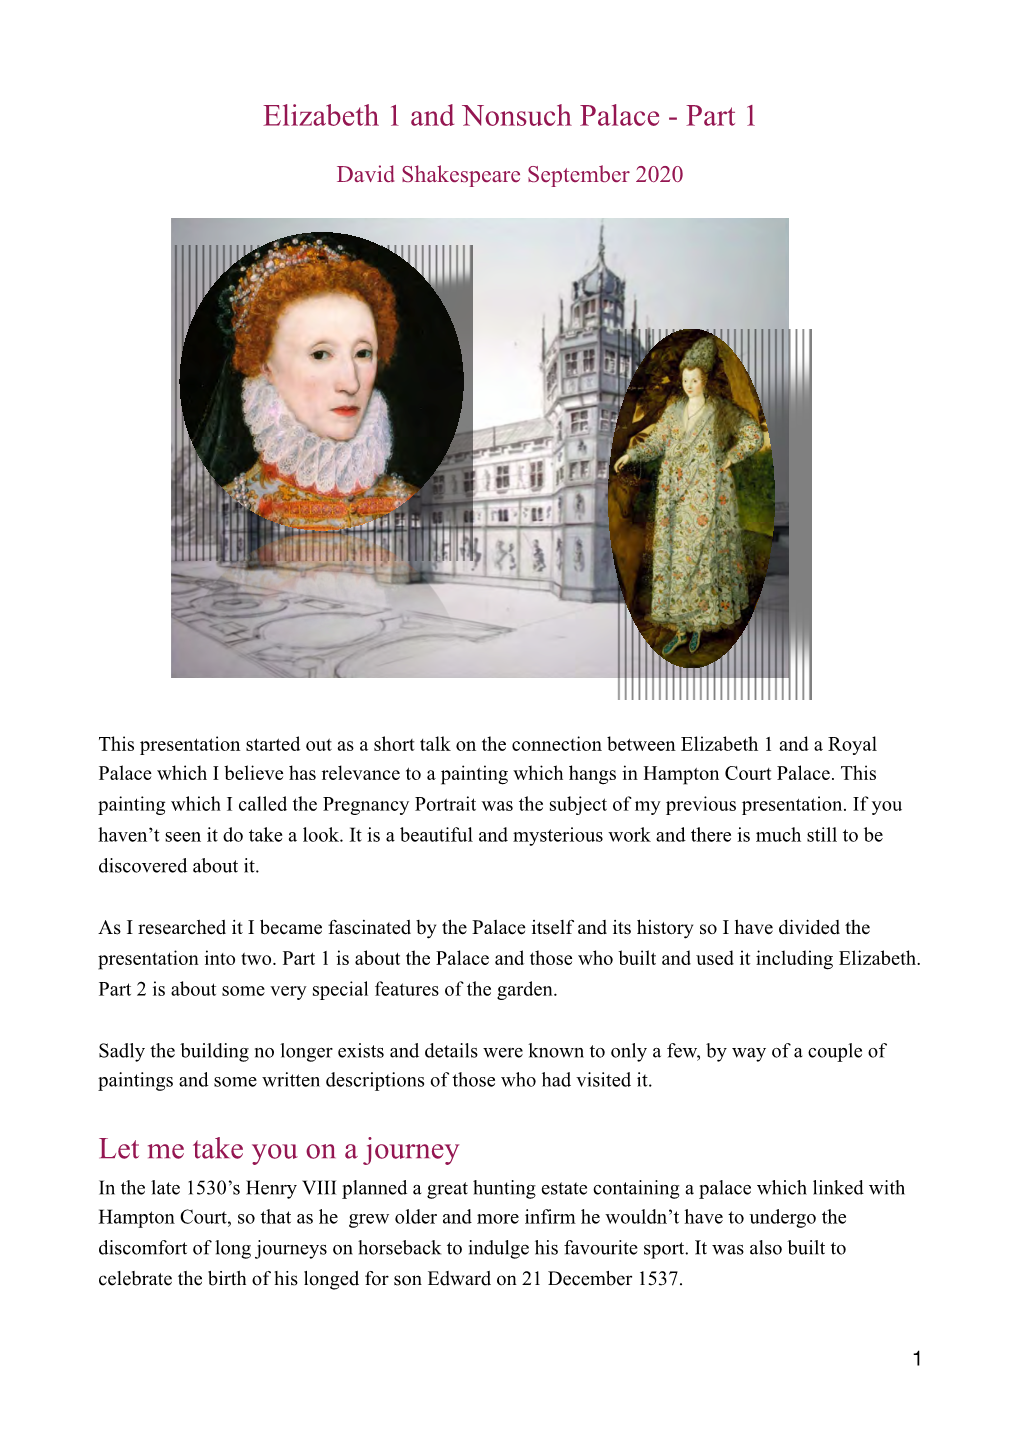 Elizabeth 1 and Nonsuch Palace Part 1